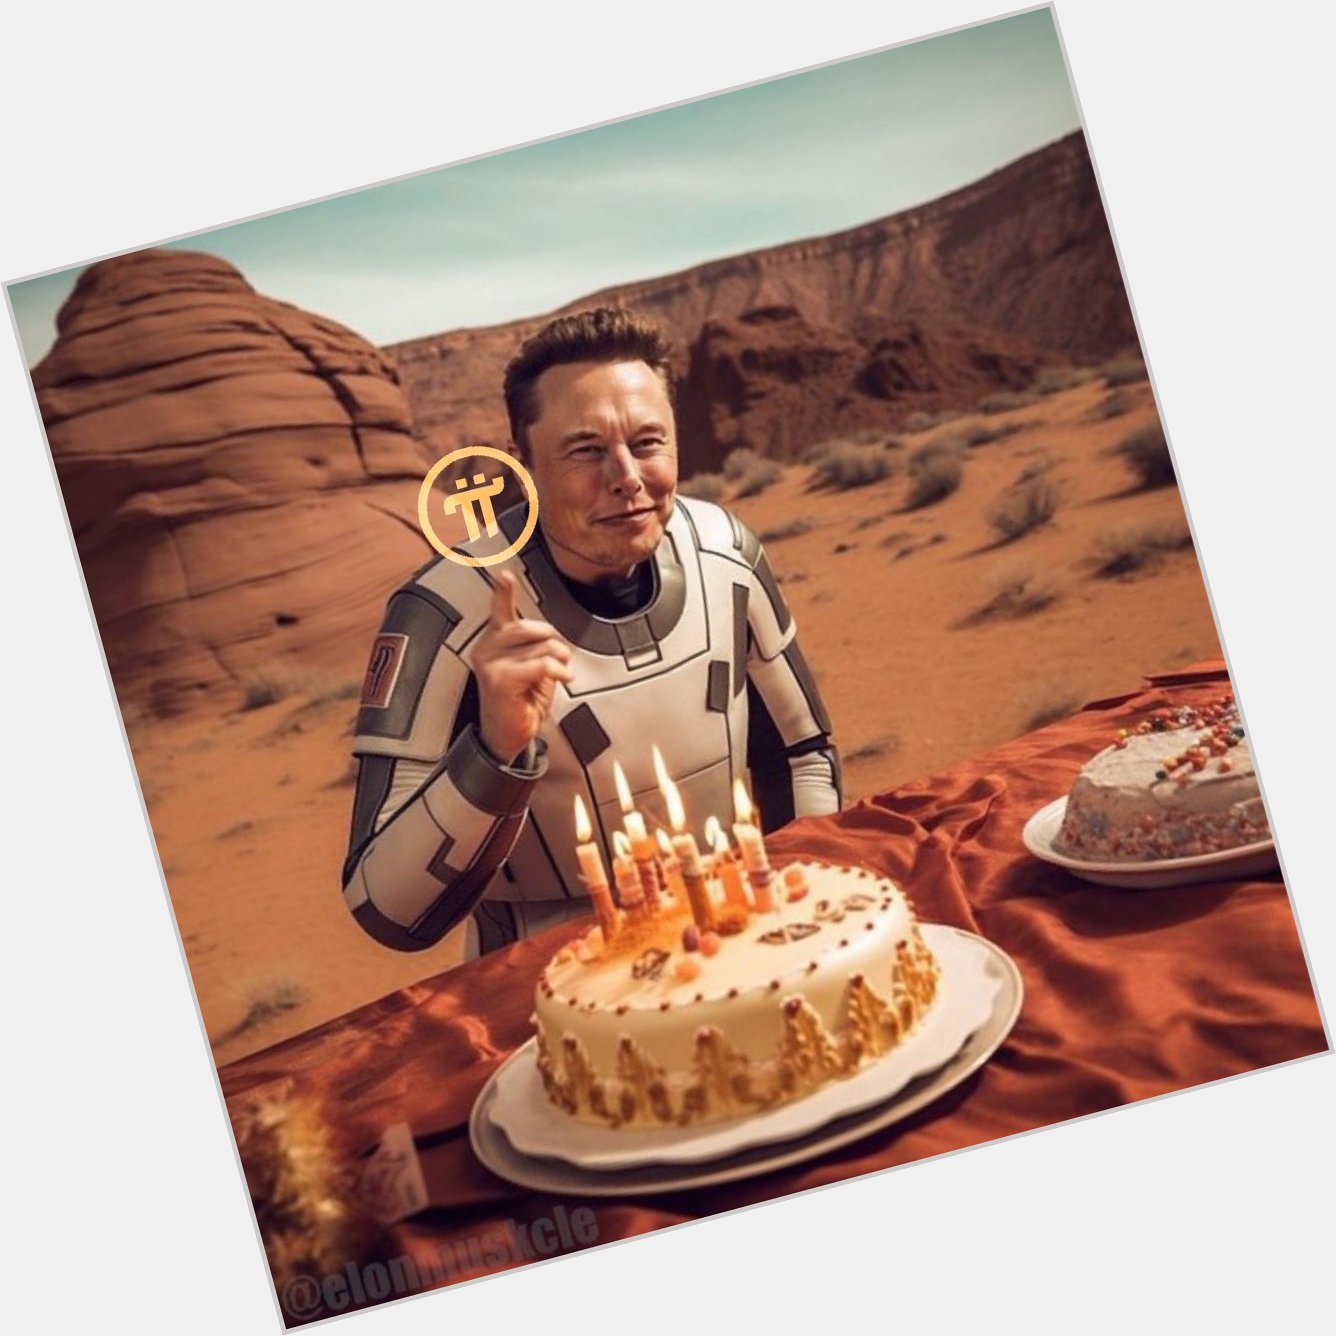 Today is indeed a great day, and Pi pioneers around the world wish Mr. Elon Musk and Pi a happy birthday            